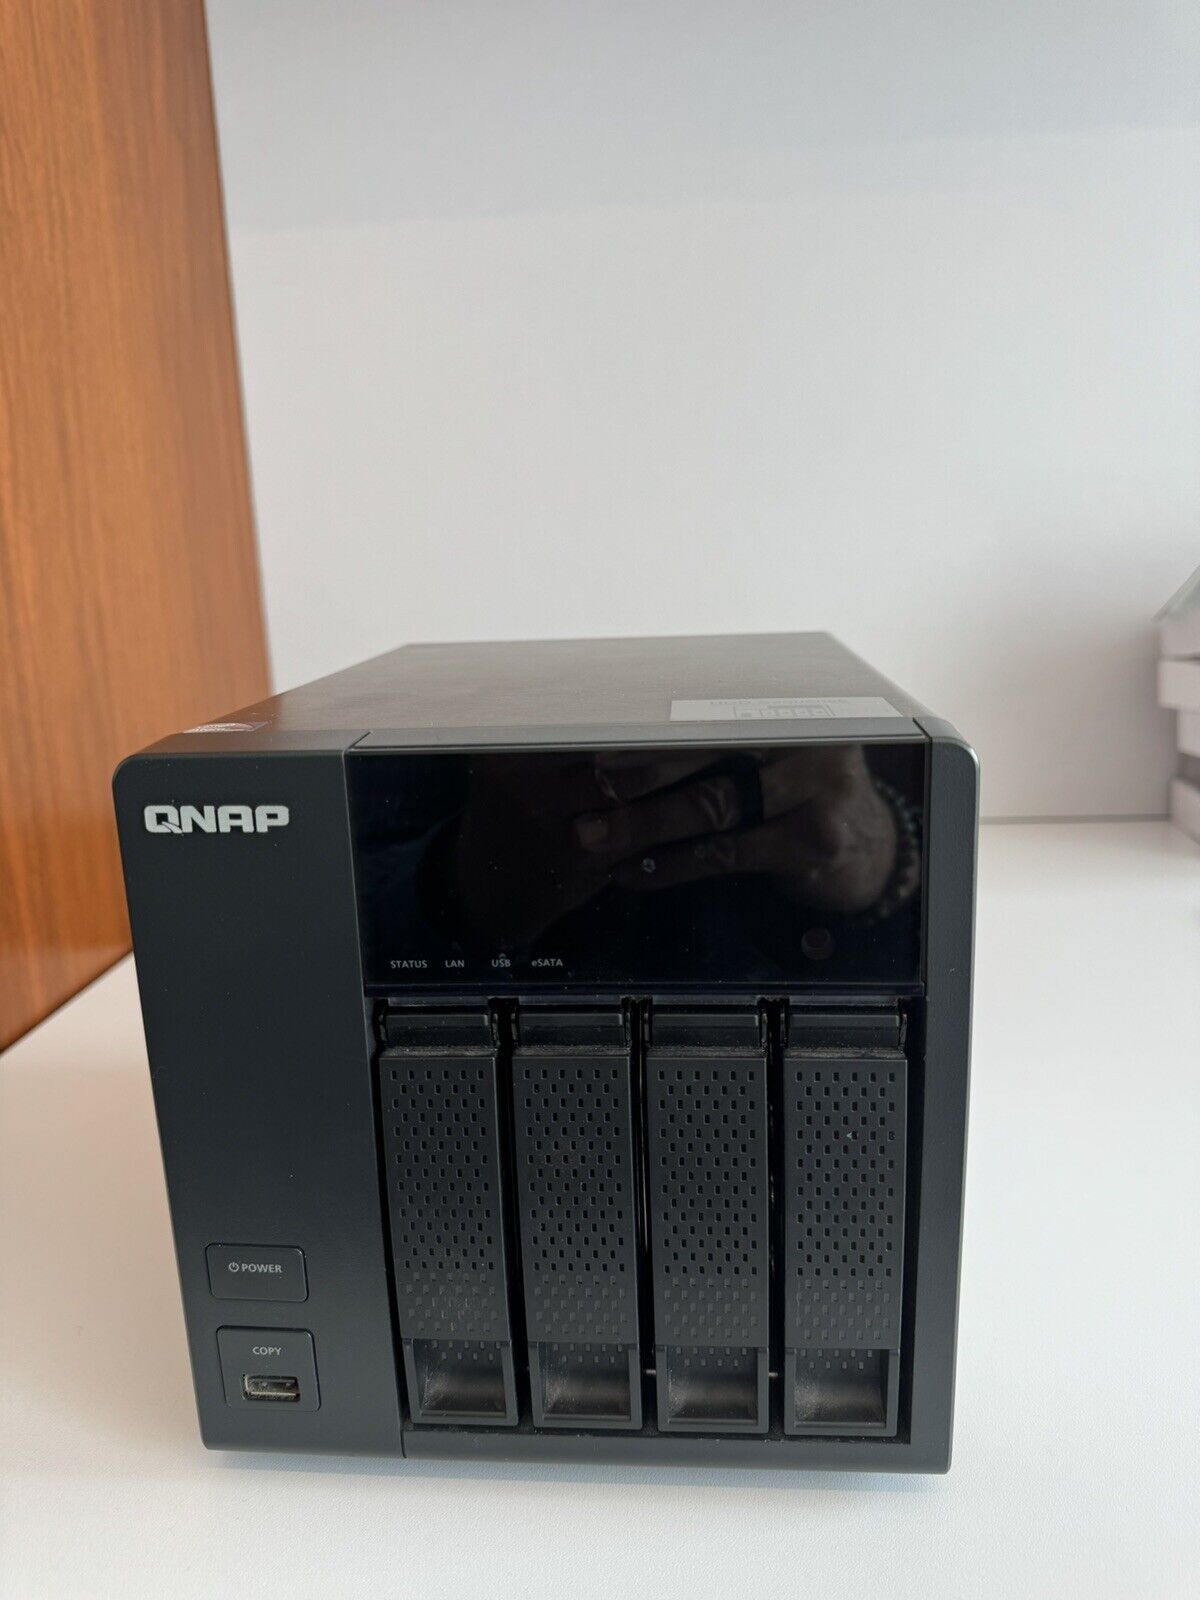 QNAP TS-469L NAS with 4 x 3TB WD HDDs